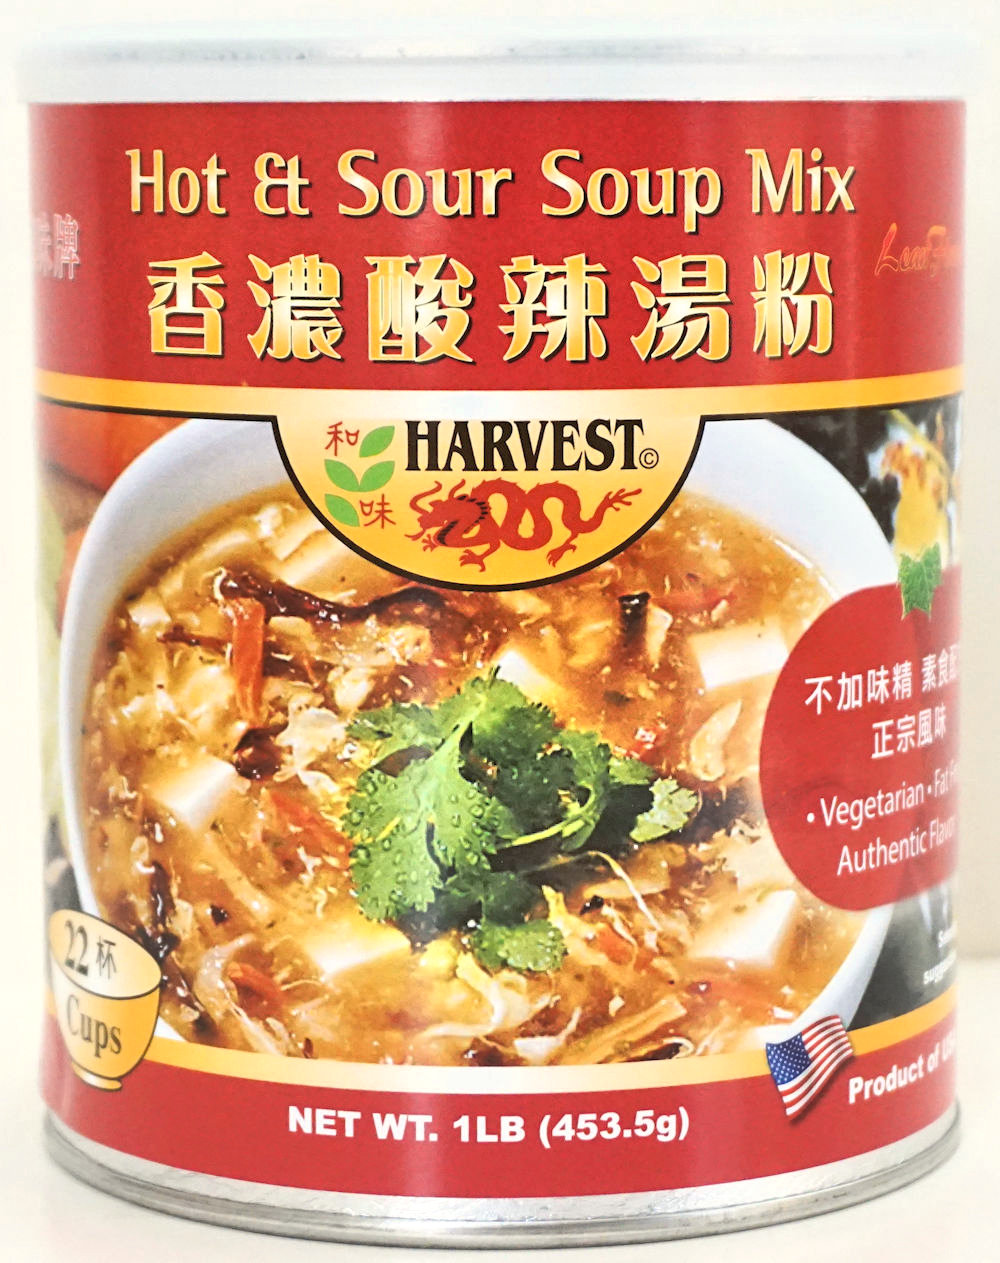 Hot and Sour Soup Mix 酸辣汤粉